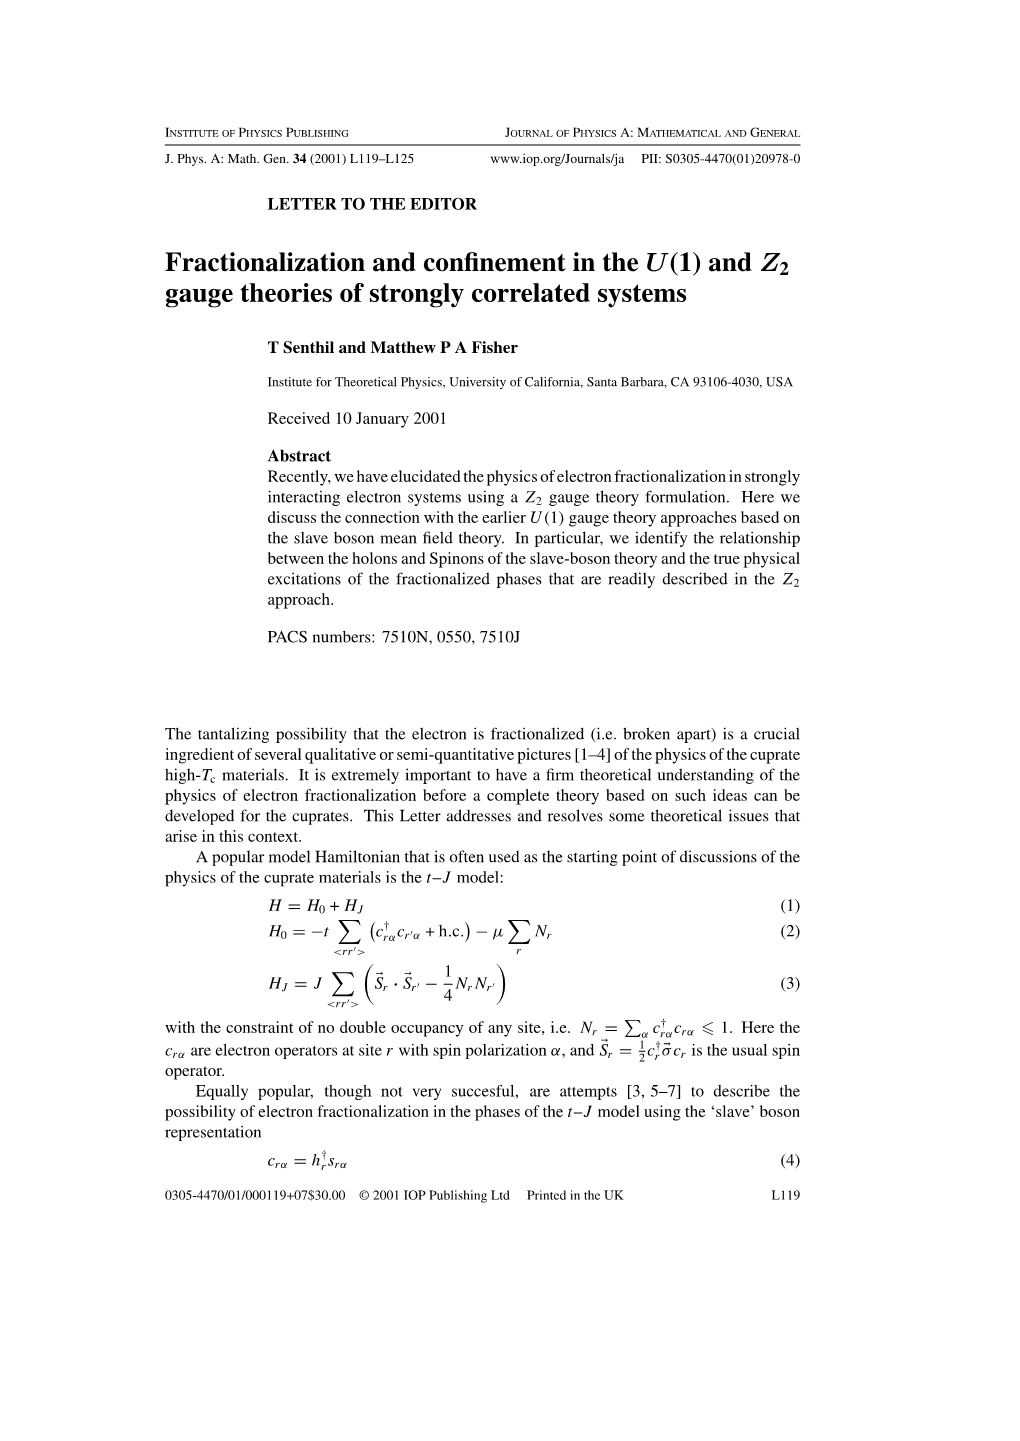 Fractionalization and Confinement in the U(1) and Z2 Gauge Theories Of